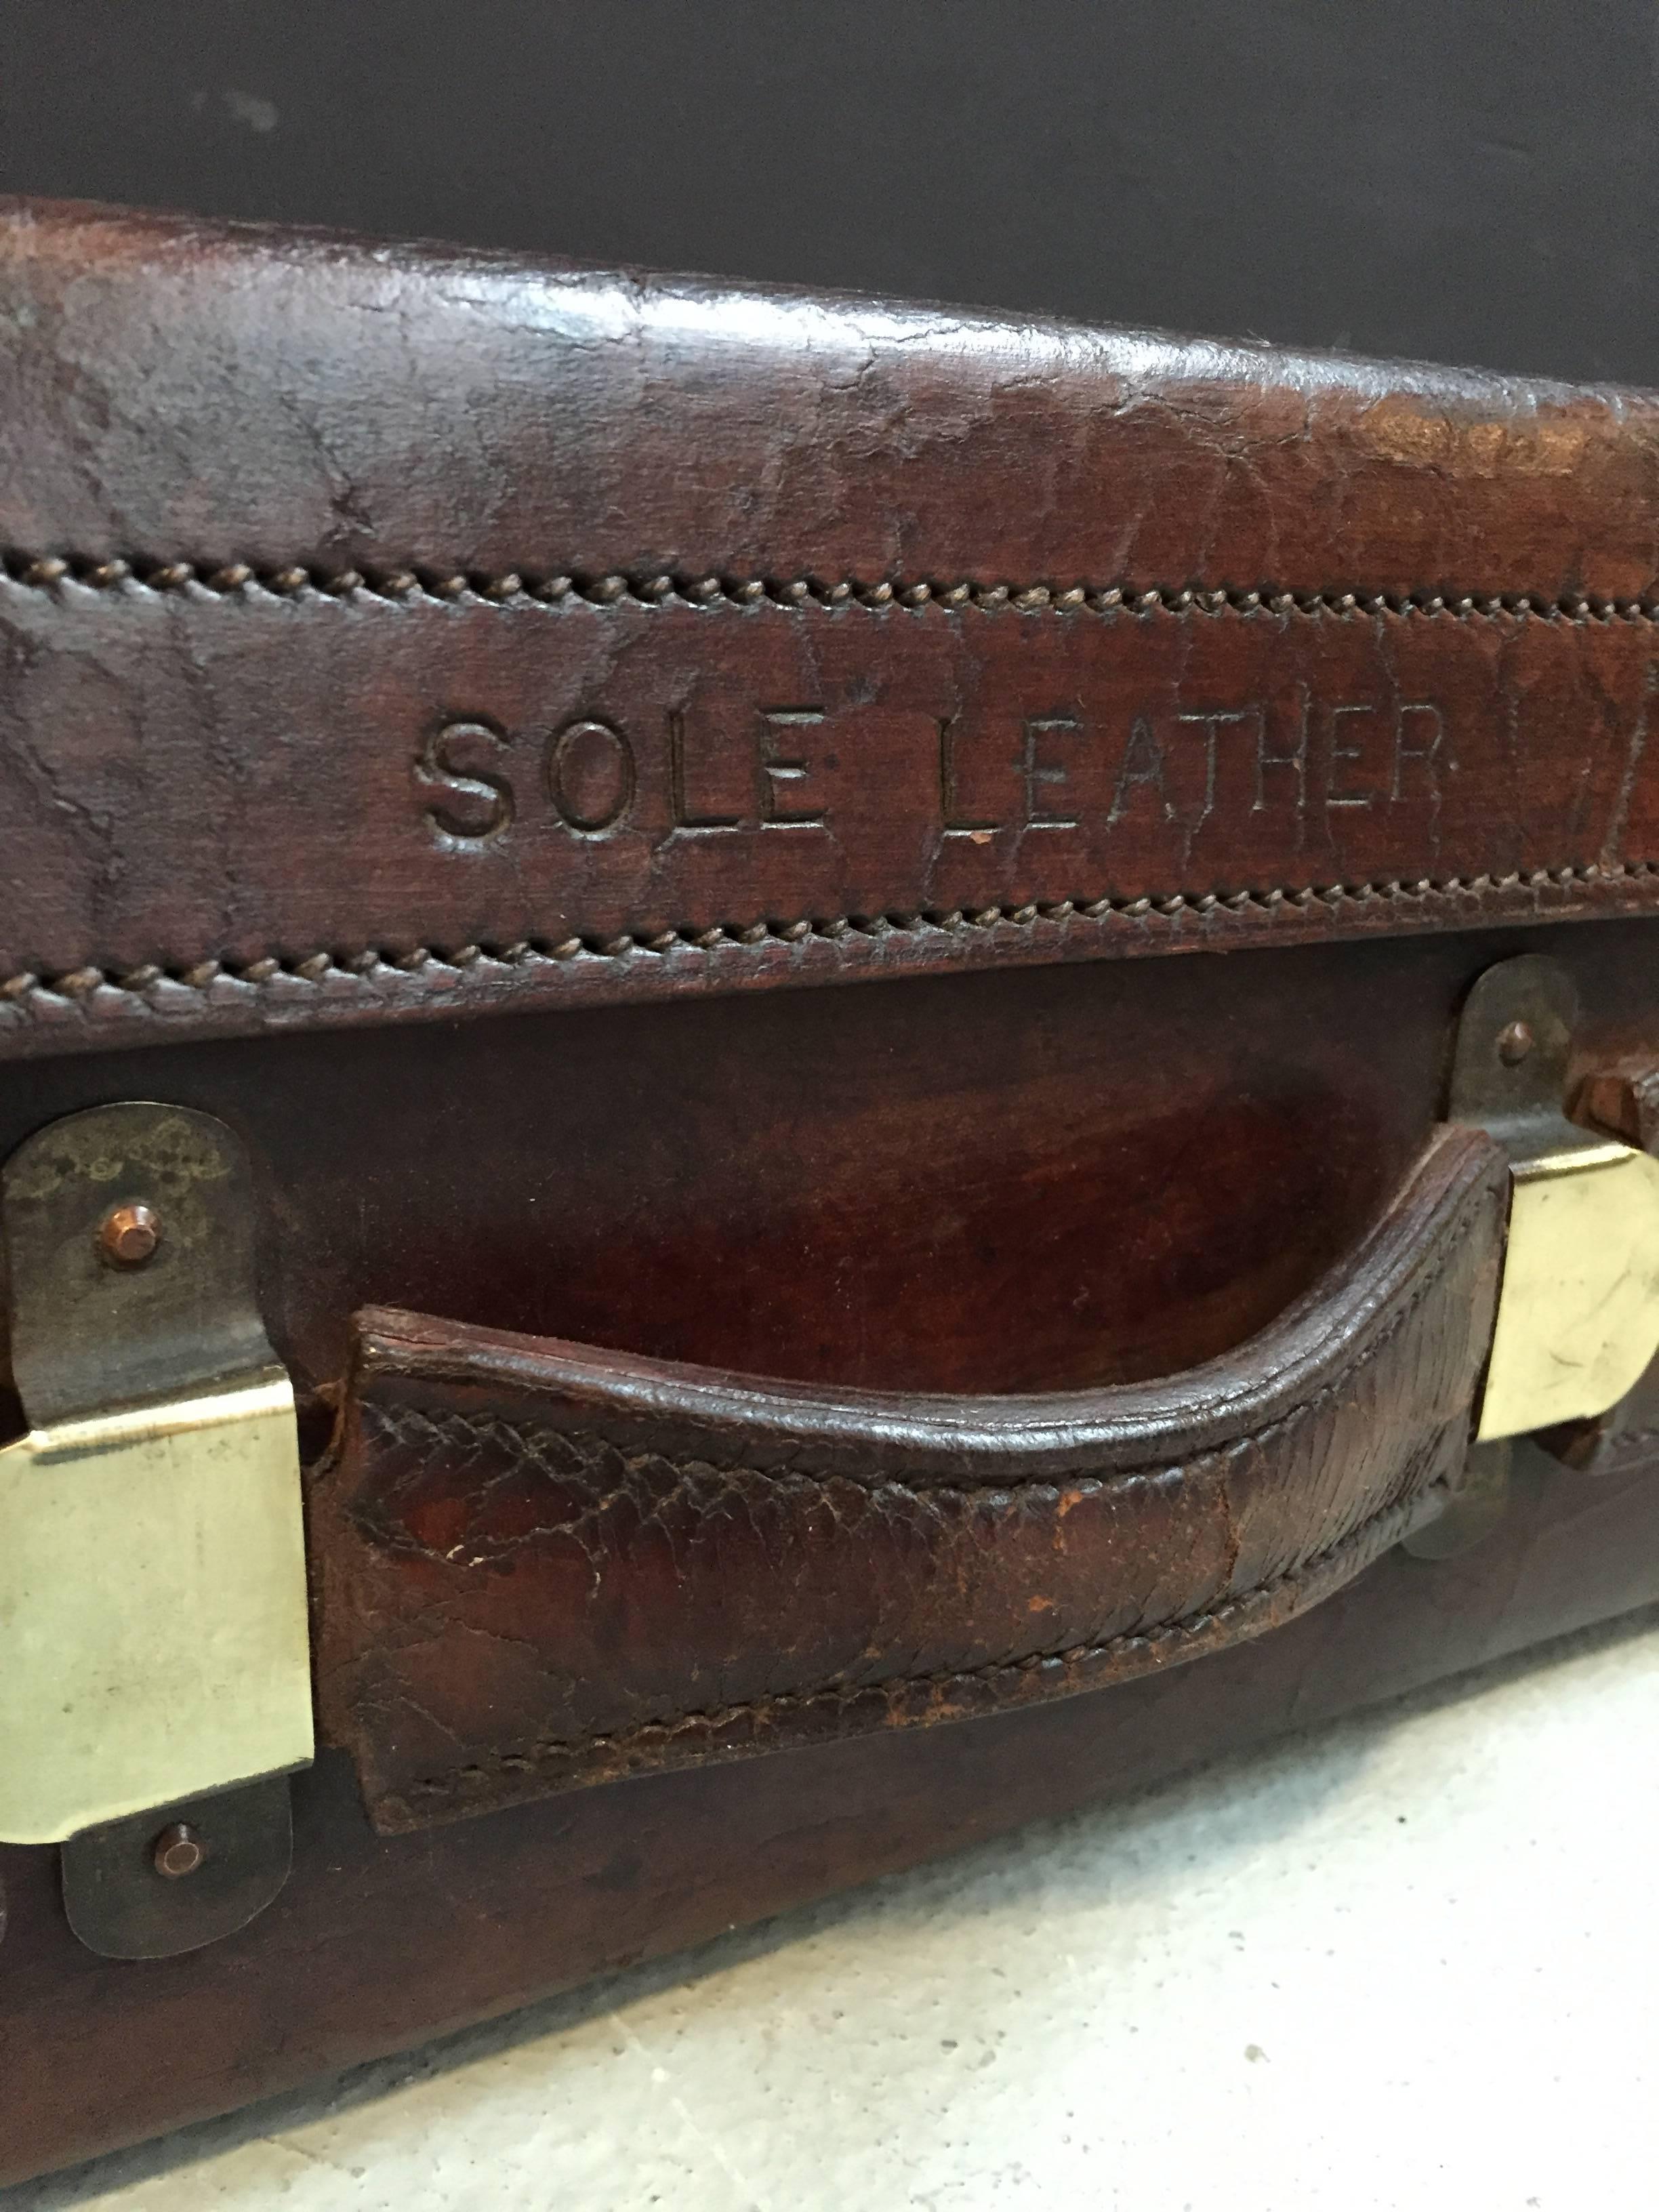 Leather suitcase in excellent condition.
